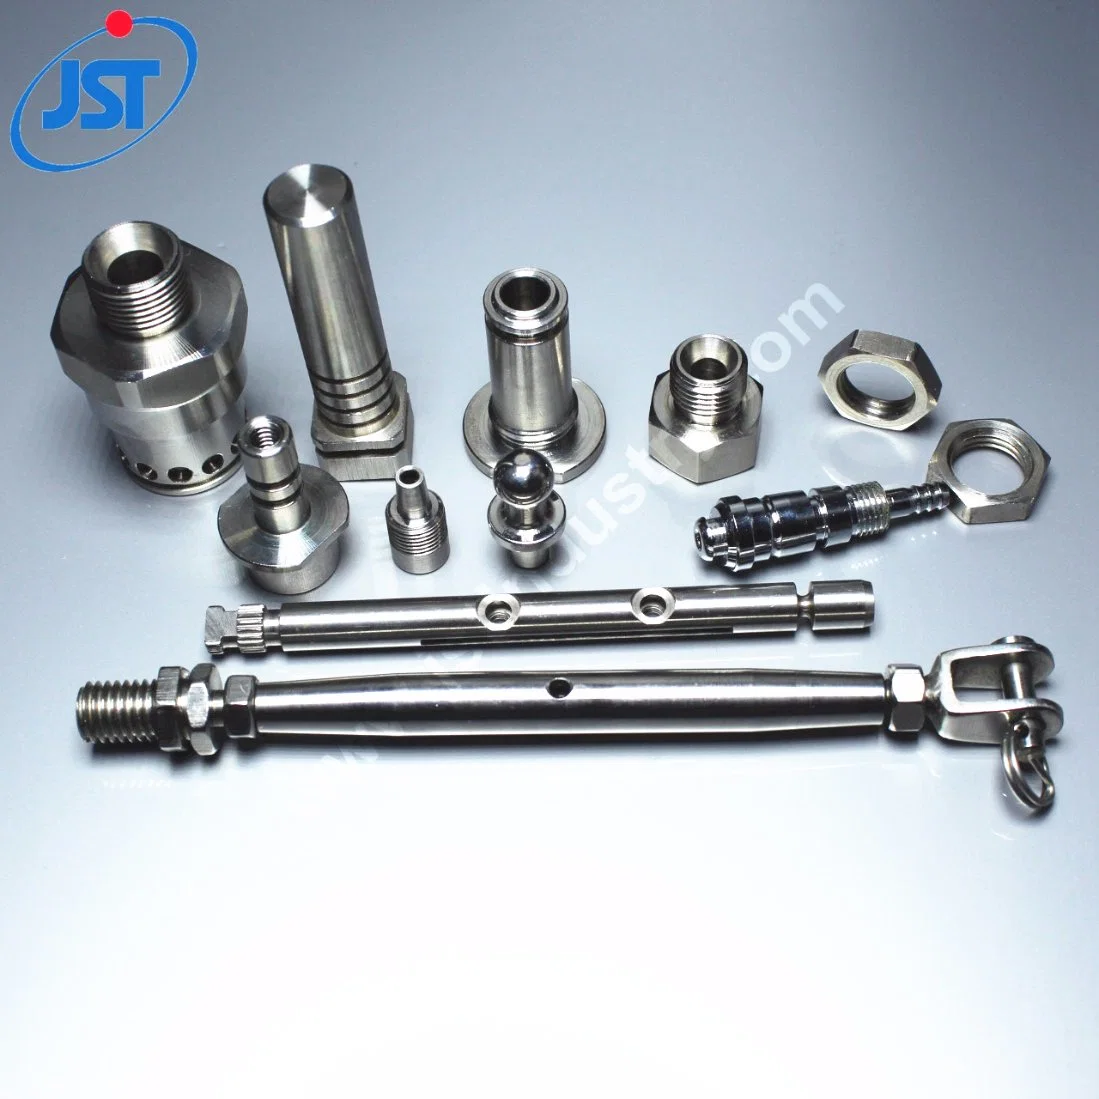 Customized CNC Machining Pipe Couplings Hose Couplings Hydraulic Fittings Tube Fittings Metal Connector Pipe Fittings Union Joint